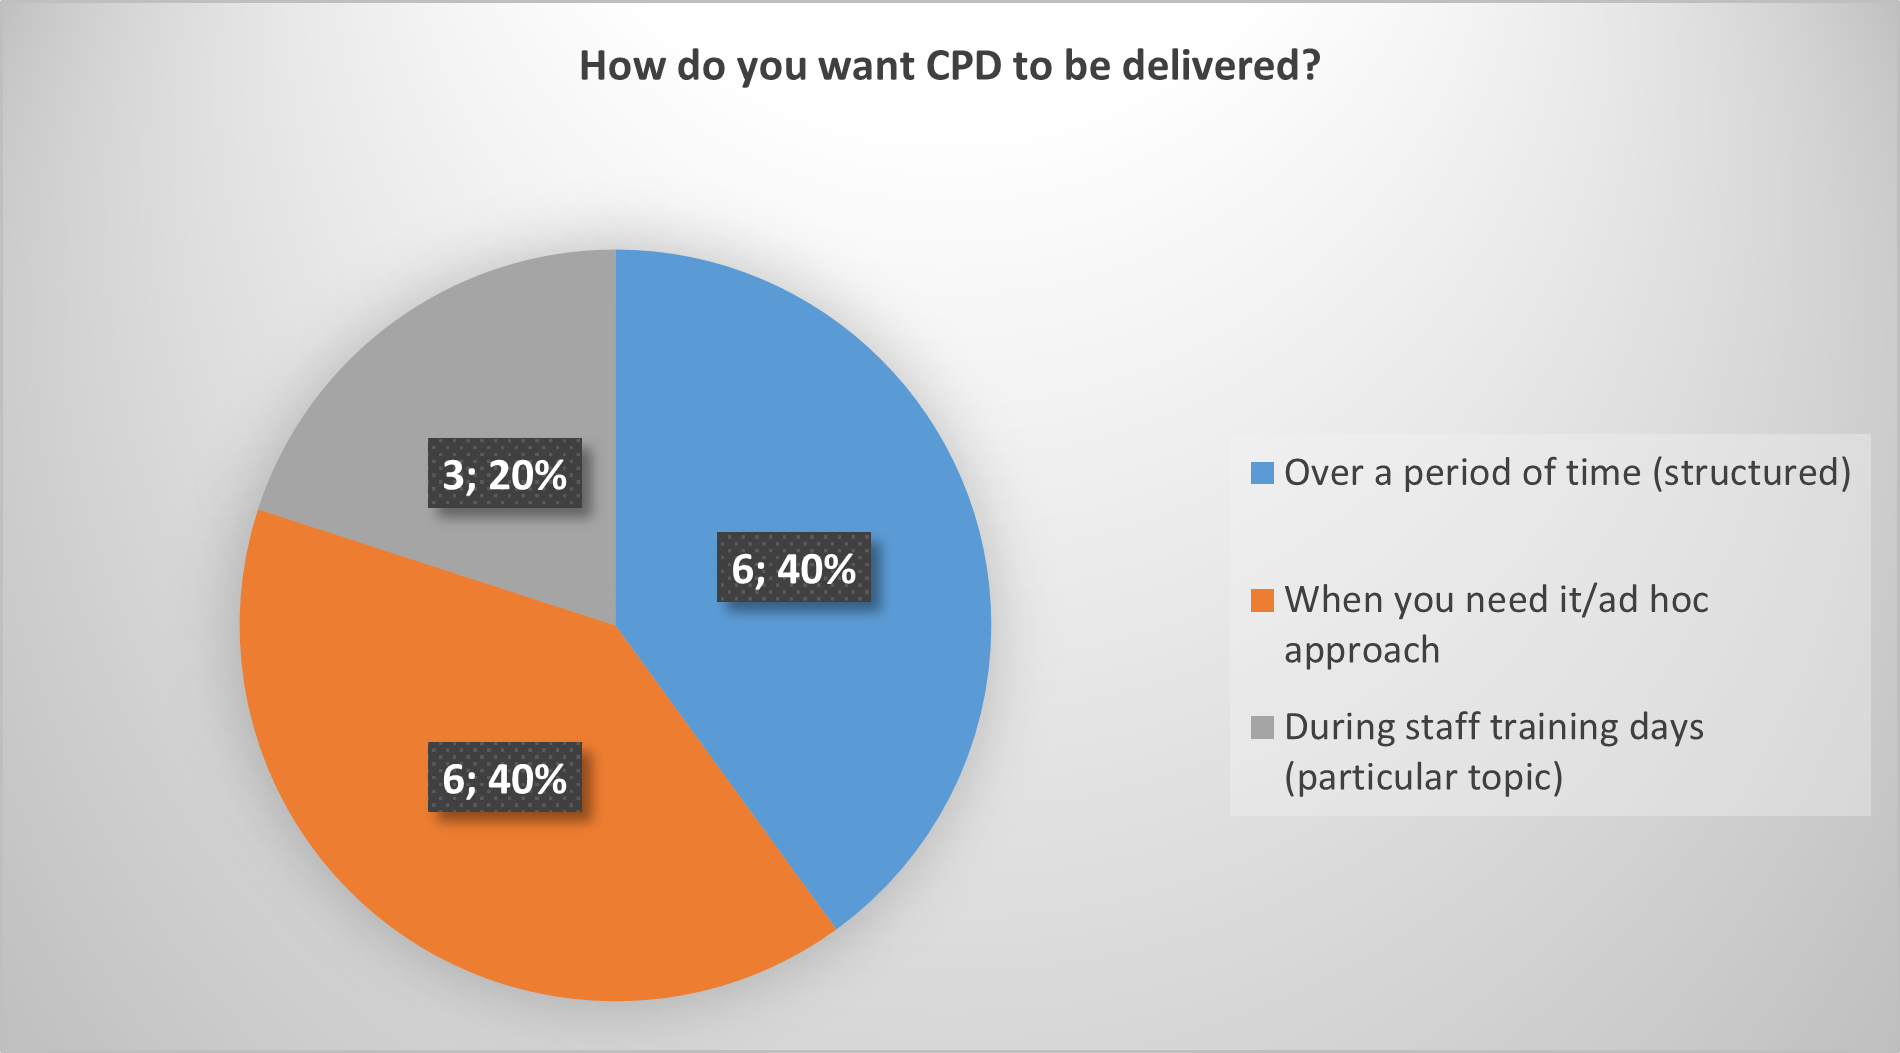 Chart showing preference of CPD delivery